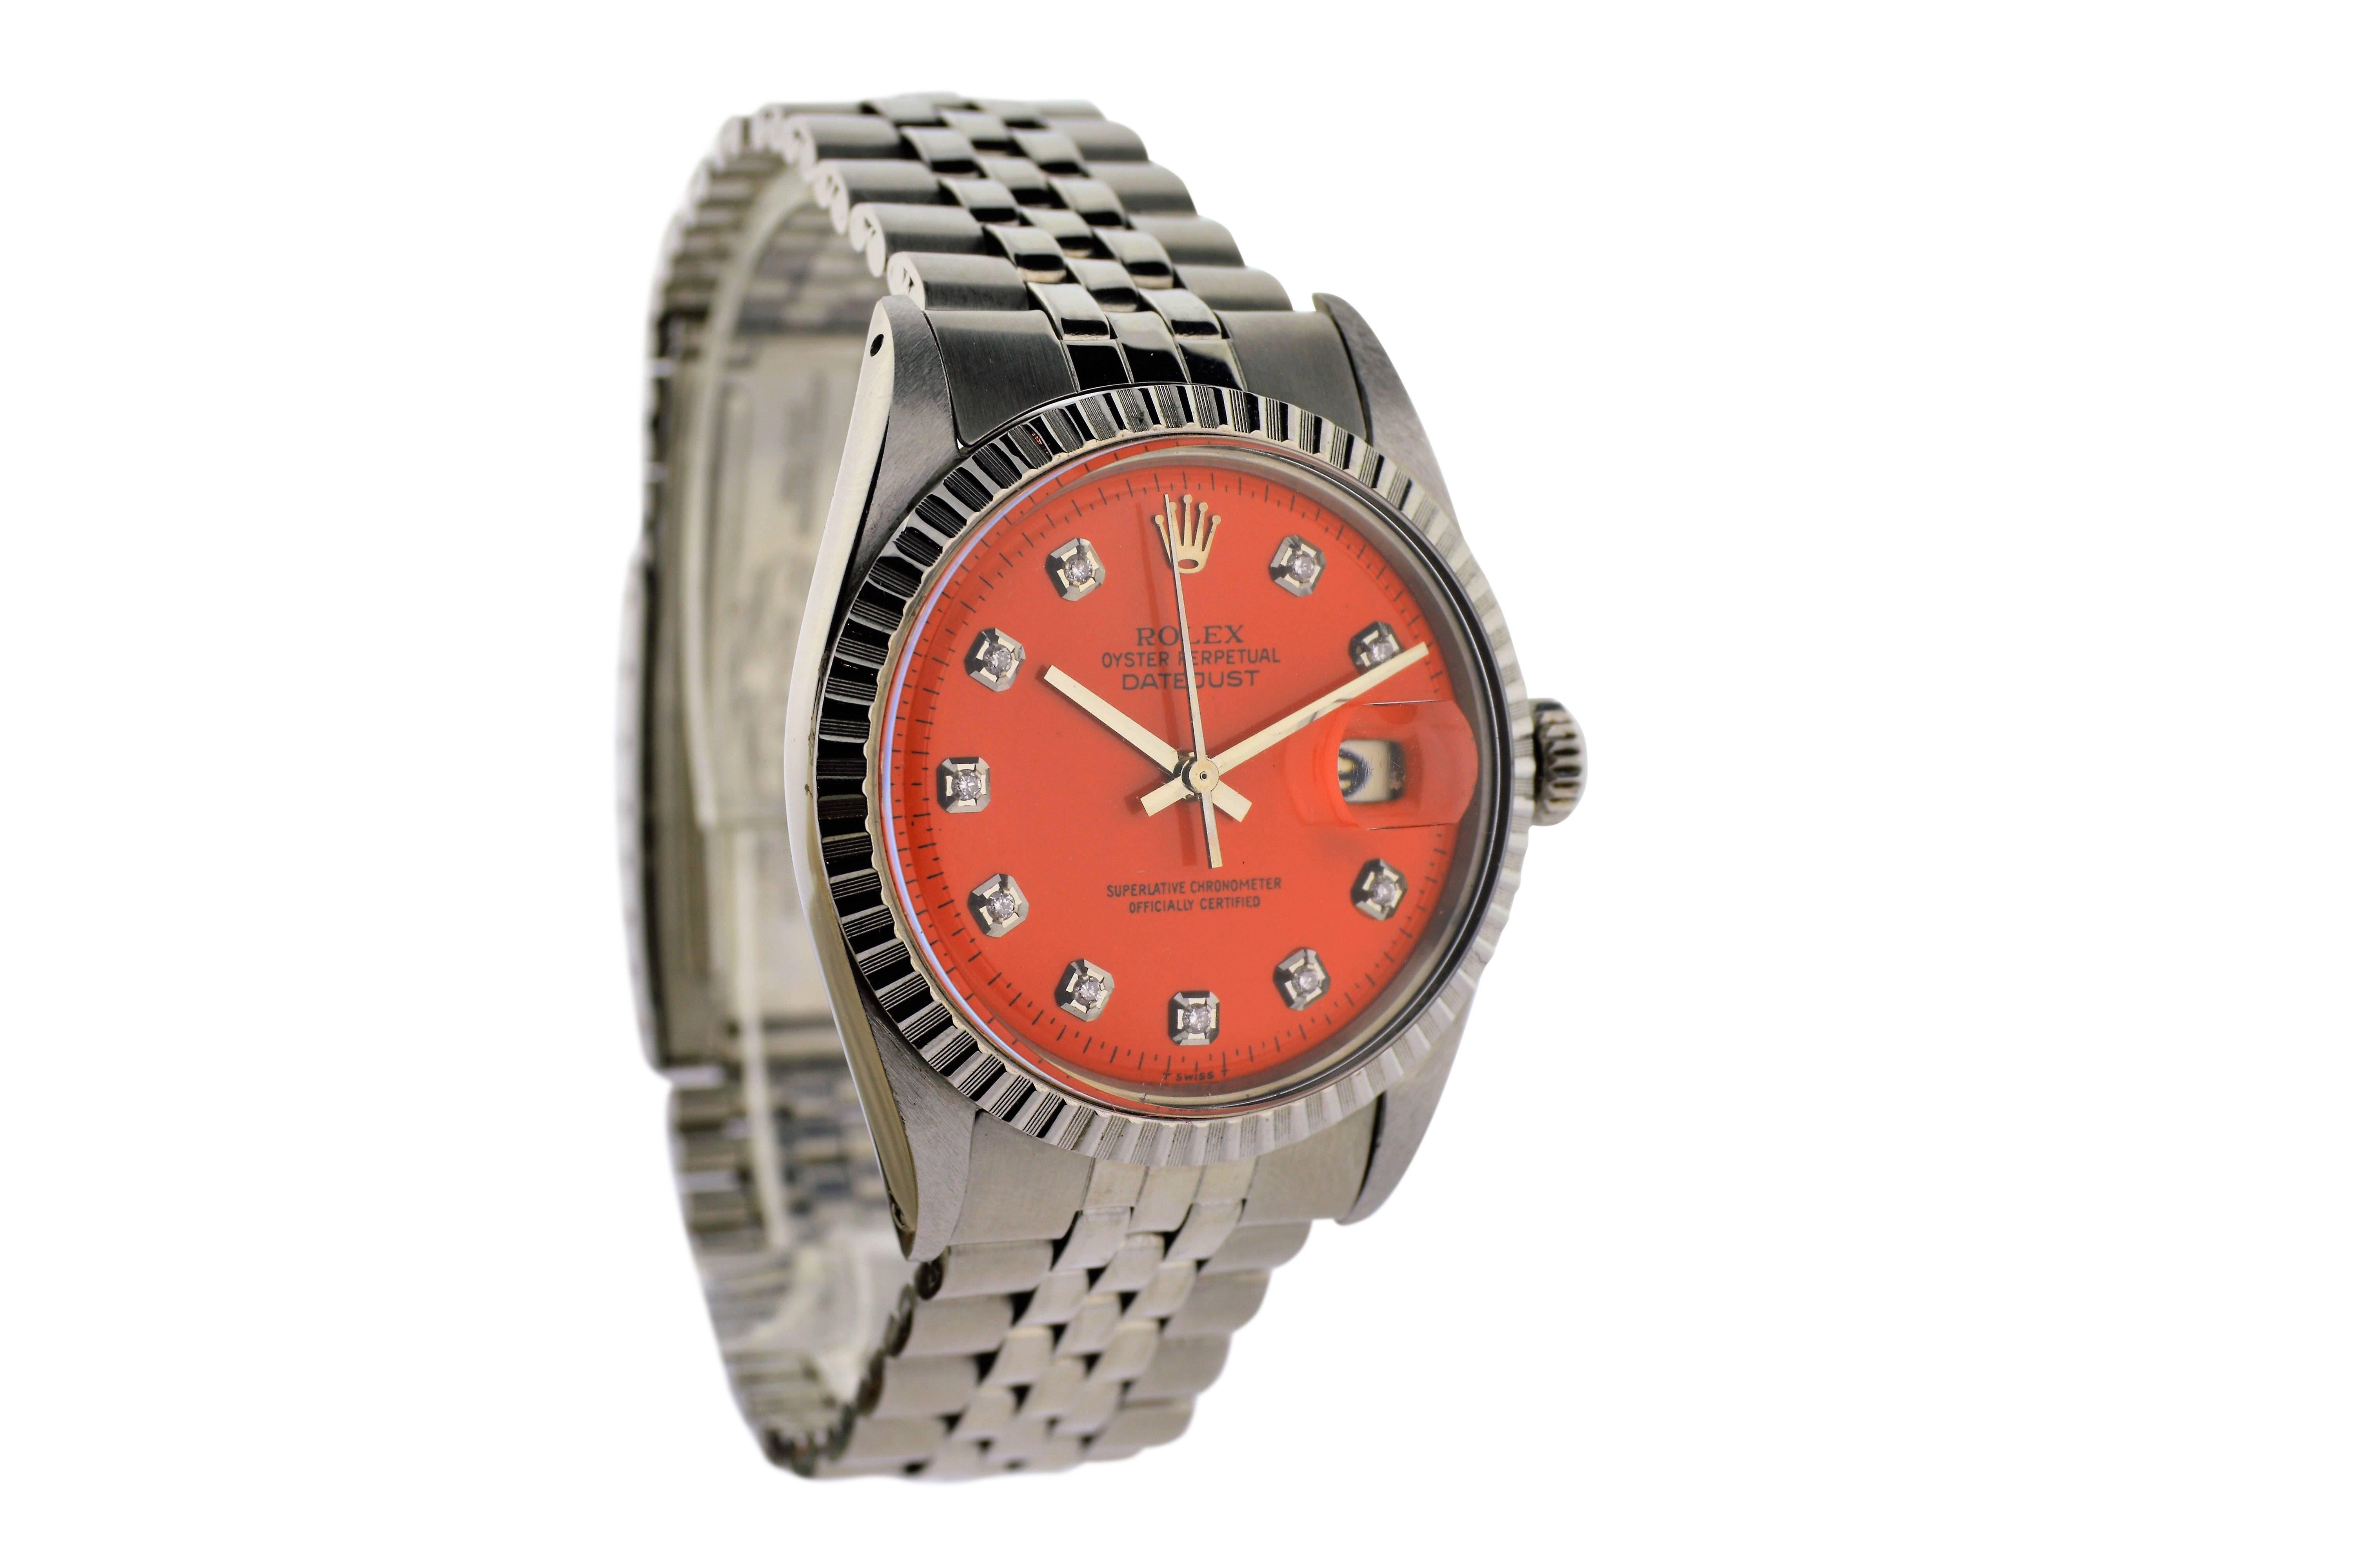 FACTORY / HOUSE: Rolex Watch Company
STYLE / REFERENCE: Datejust / Reference 1601 / 1603
METAL / MATERIAL: Stainless Steel
CIRCA: 1970's
MOVEMENT / CALIBER: Perpetual Winding / 26 Jewels / Caliber 1570
DIAL / HANDS: Rolex Swiss Standards Replacement